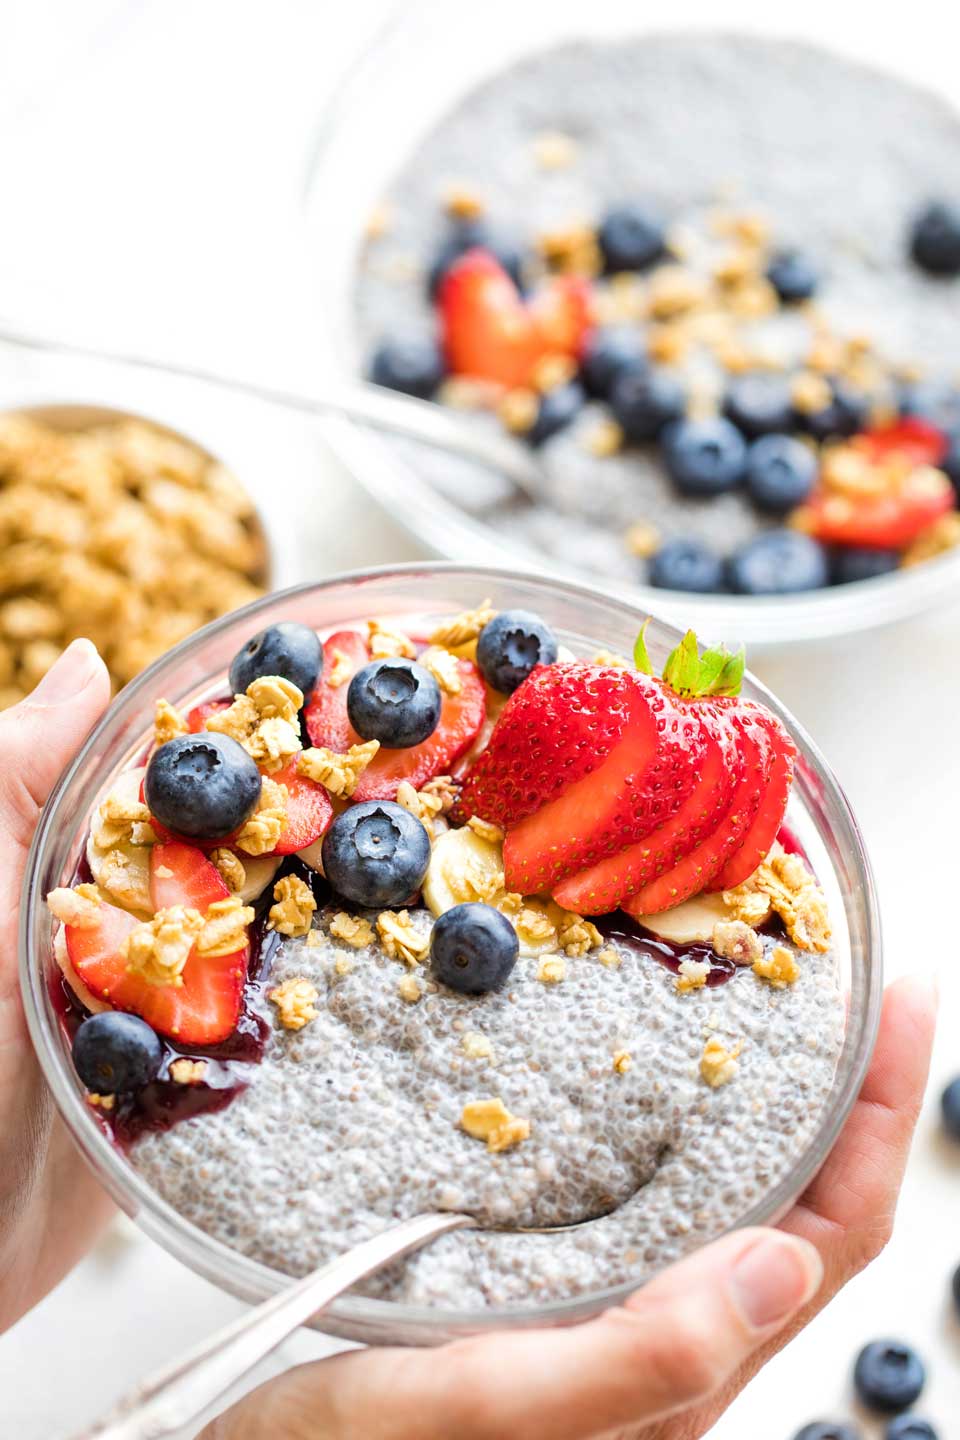 Chia Pudding with Coconut Milk - Wholefood Soulfood Kitchen